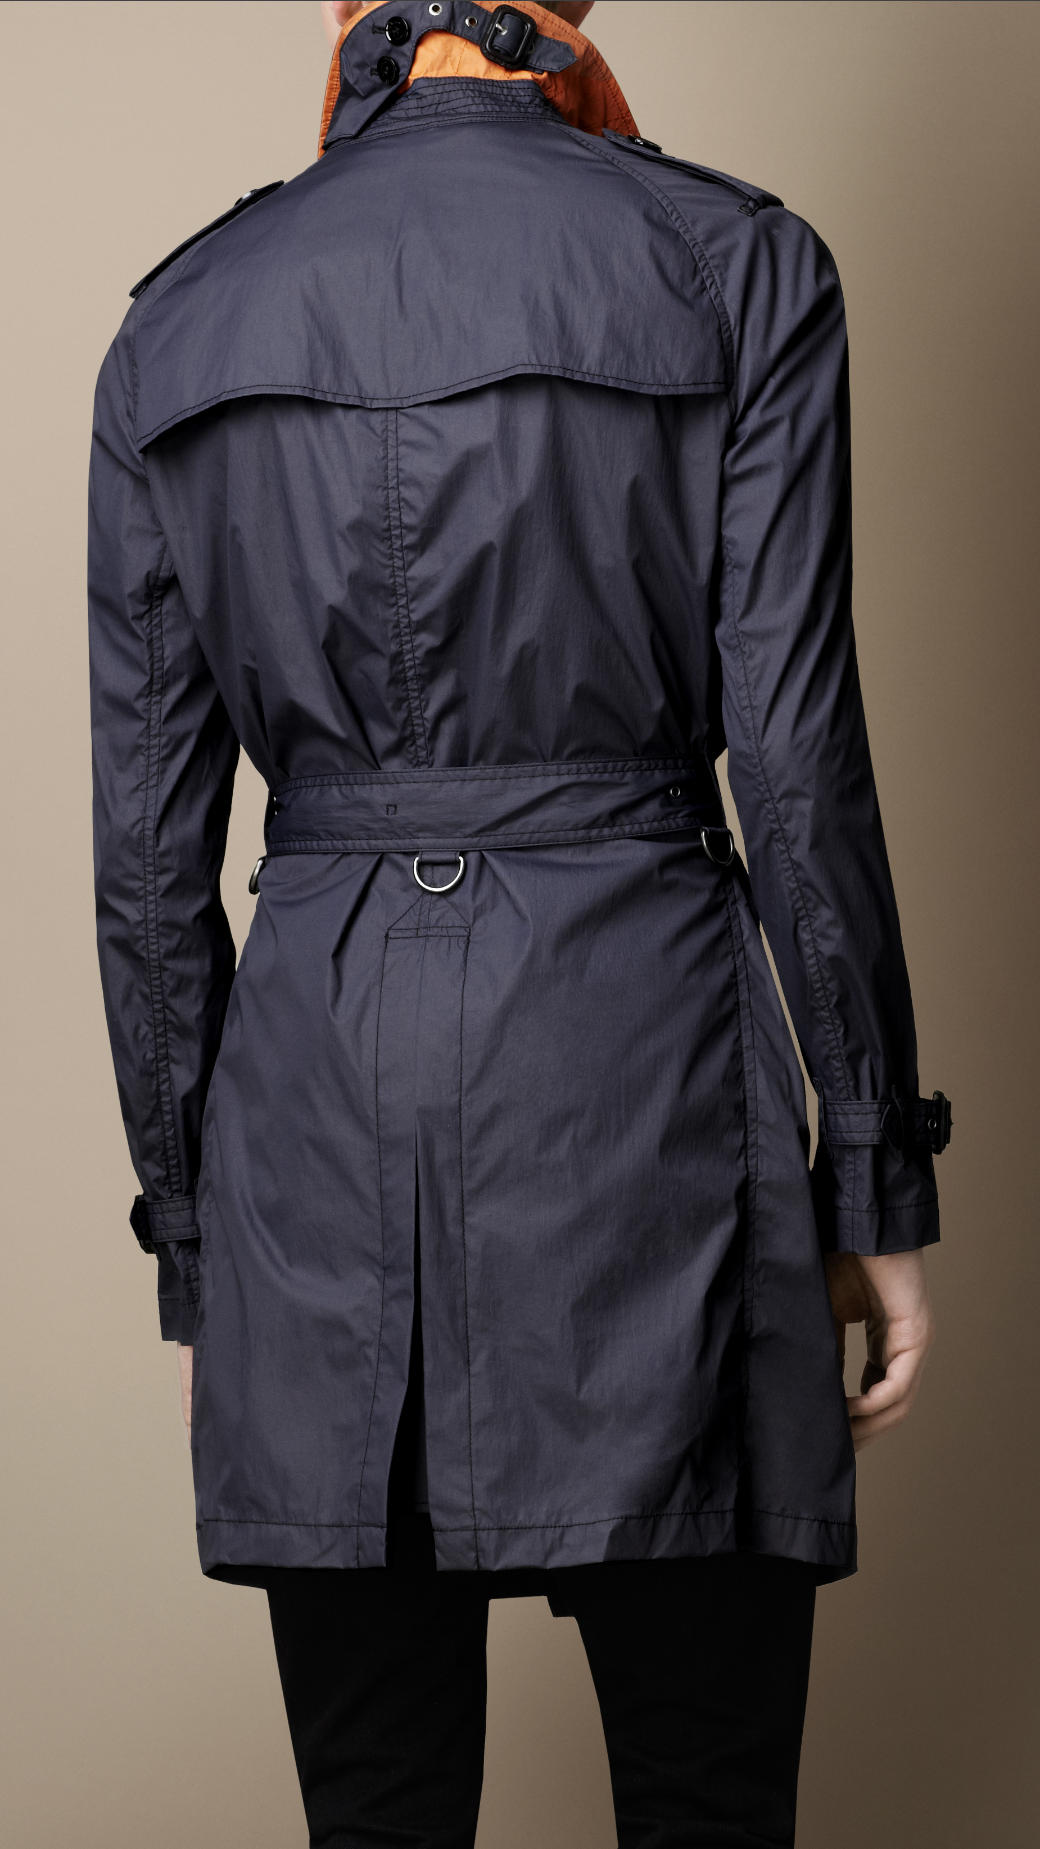 Lyst - Burberry Midlength Contrast Lining Trench Coat in Blue for Men